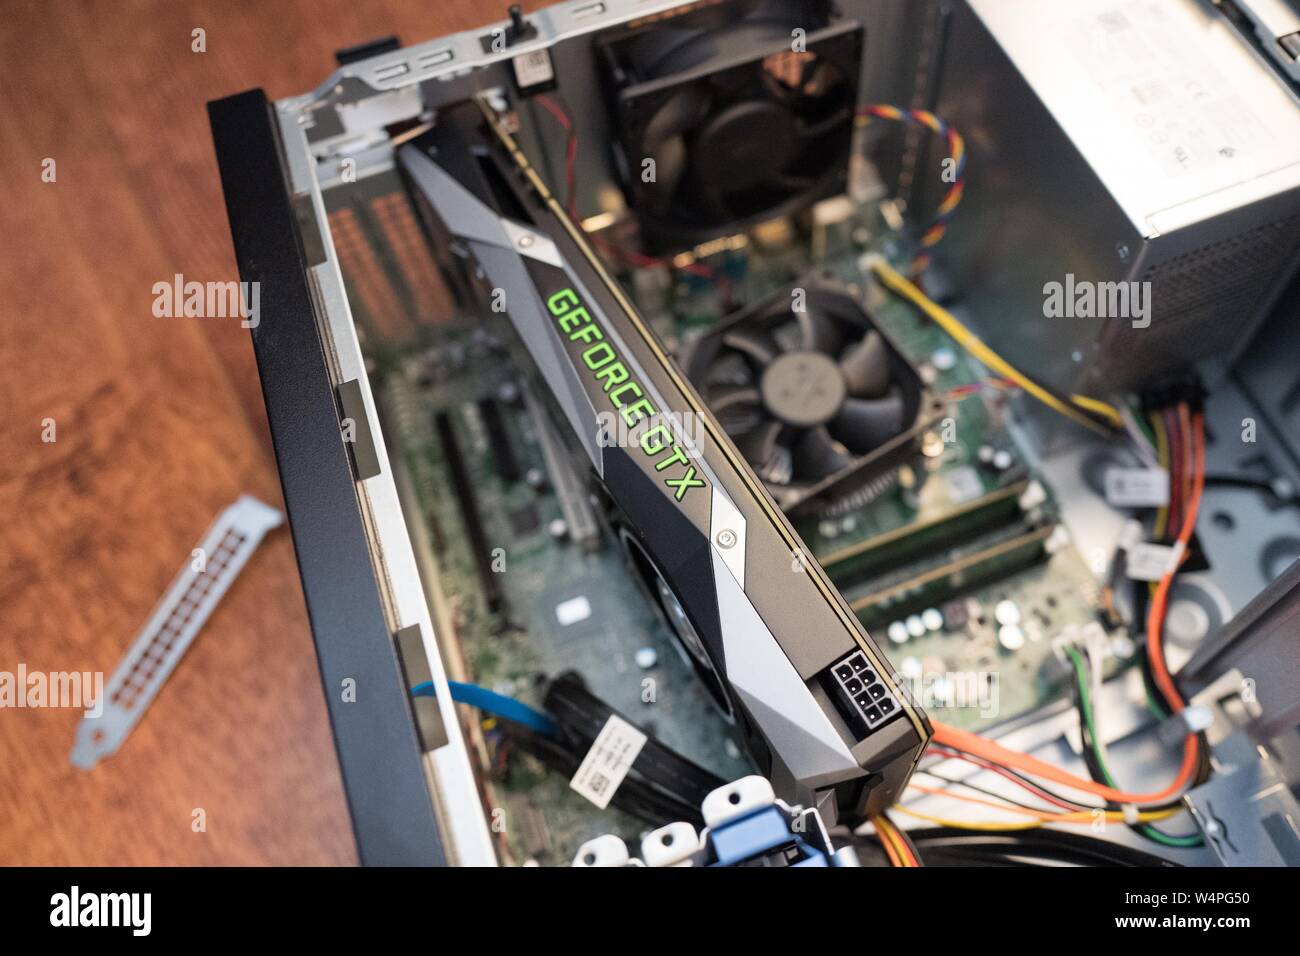 New Nvidia 1070 GTX Graphical Processing Unit (GPU), aka graphics card,  being installed in a cryptocurrency mining computer for mining Bitcoin  alternatives, San Ramon, California, August 29, 2018 Stock Photo - Alamy